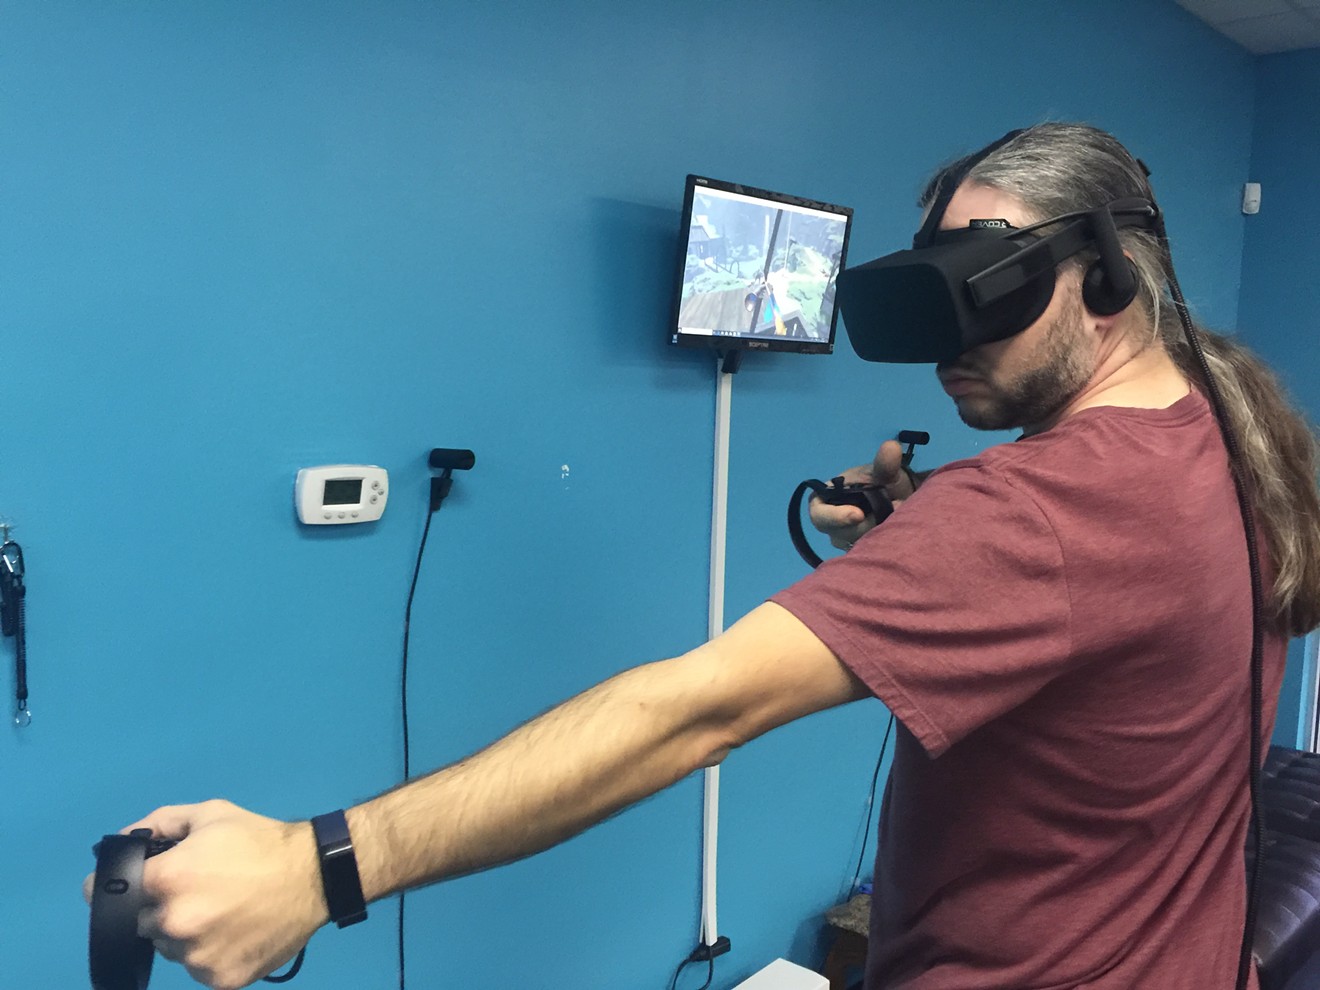 Jerry Nerviano pulls back the string on a virtual bow in the VR game Elven Assassin on an Oculus Rift at ImaginationsVR, a virtual reality arcade based in Allen.